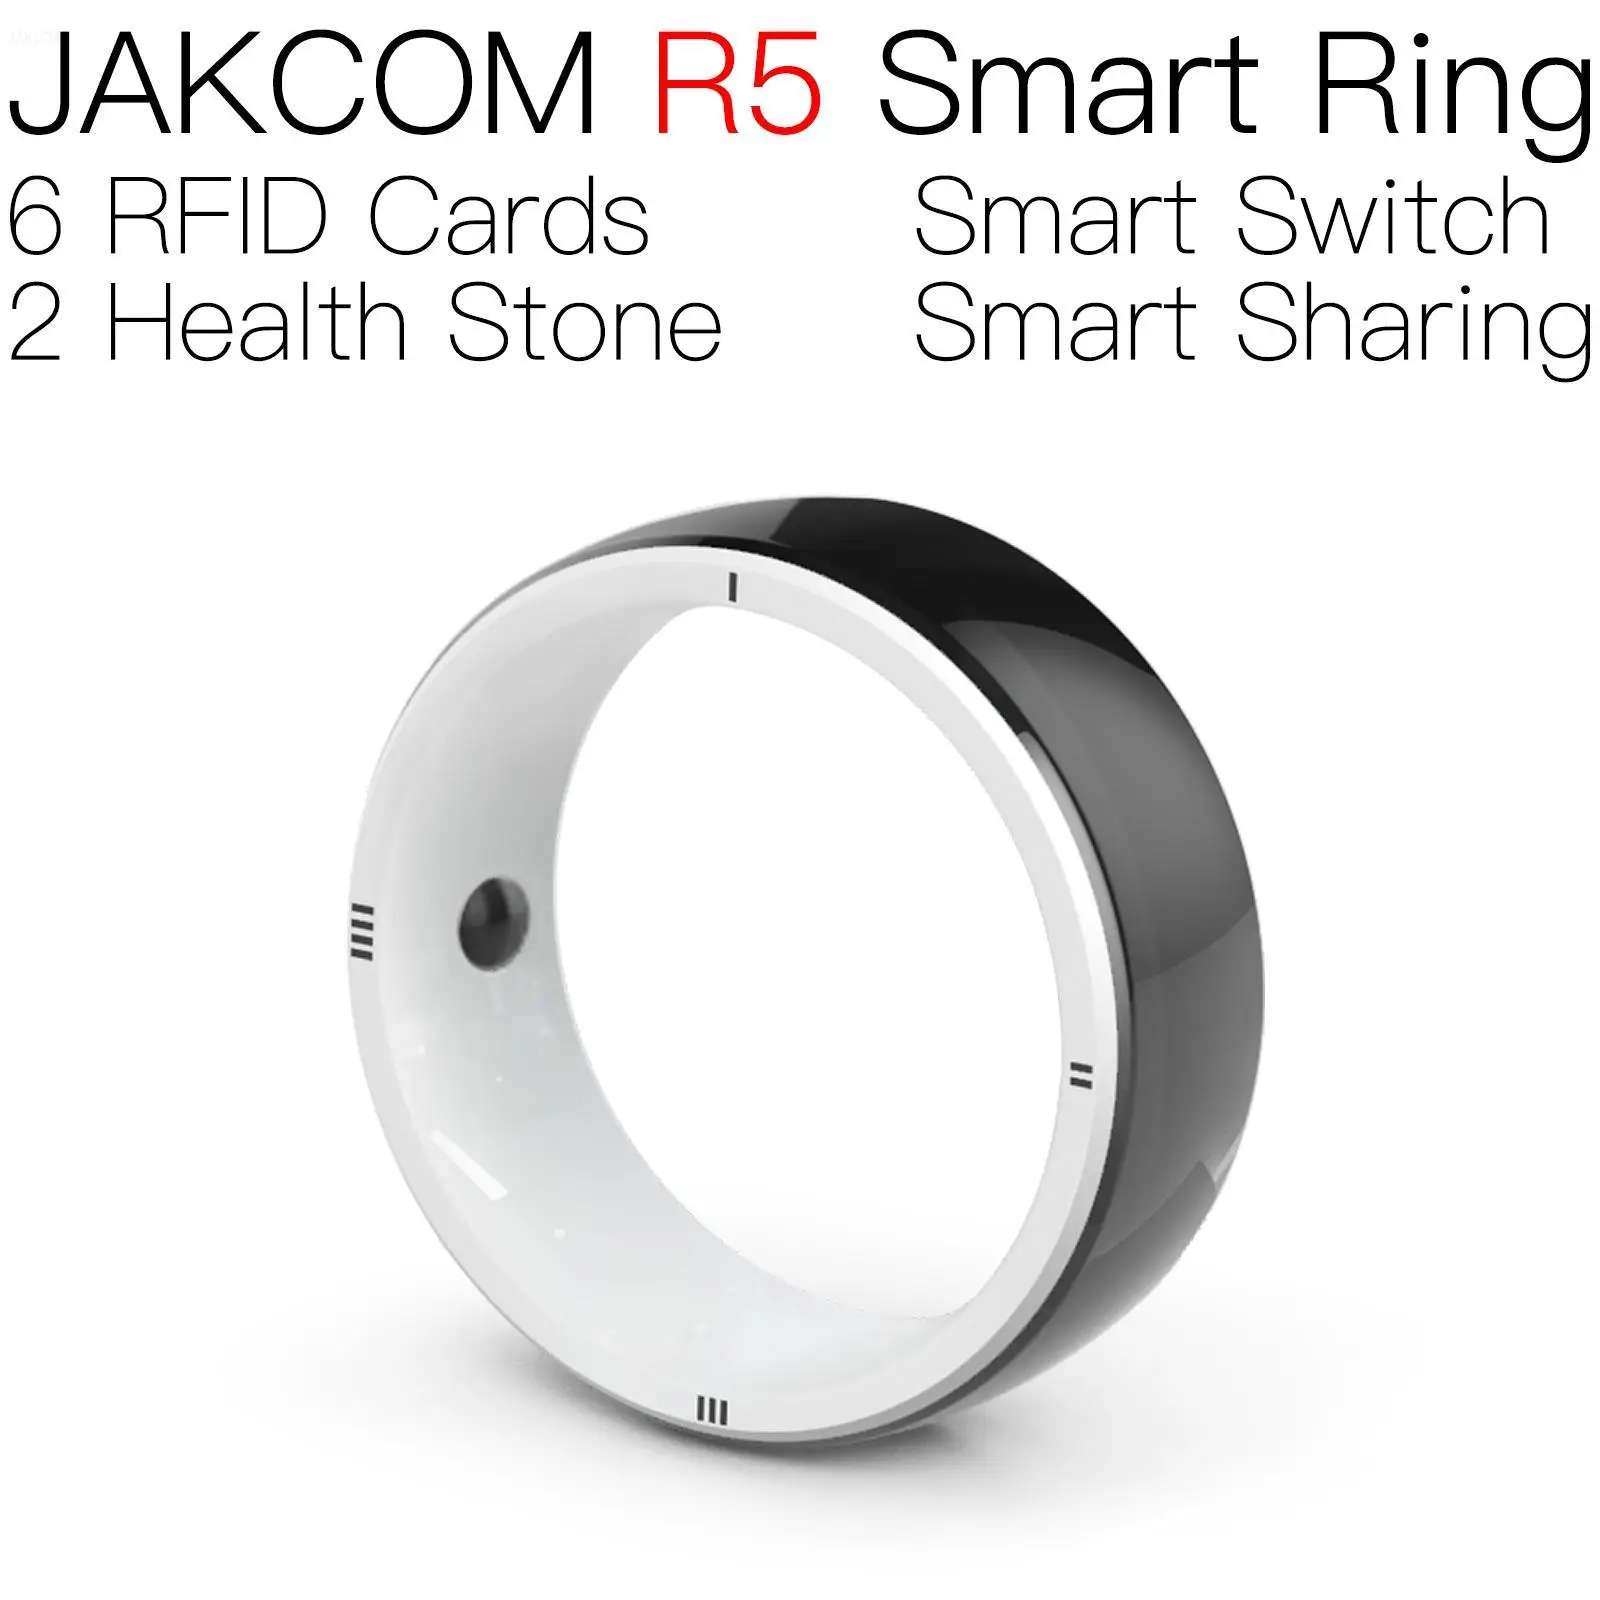 

JAKCOM R5 Smart Ring Super value as rfid keychain nfc chip clothes pet door for dogs with microchip alien 9662 card 5 in 1 anti